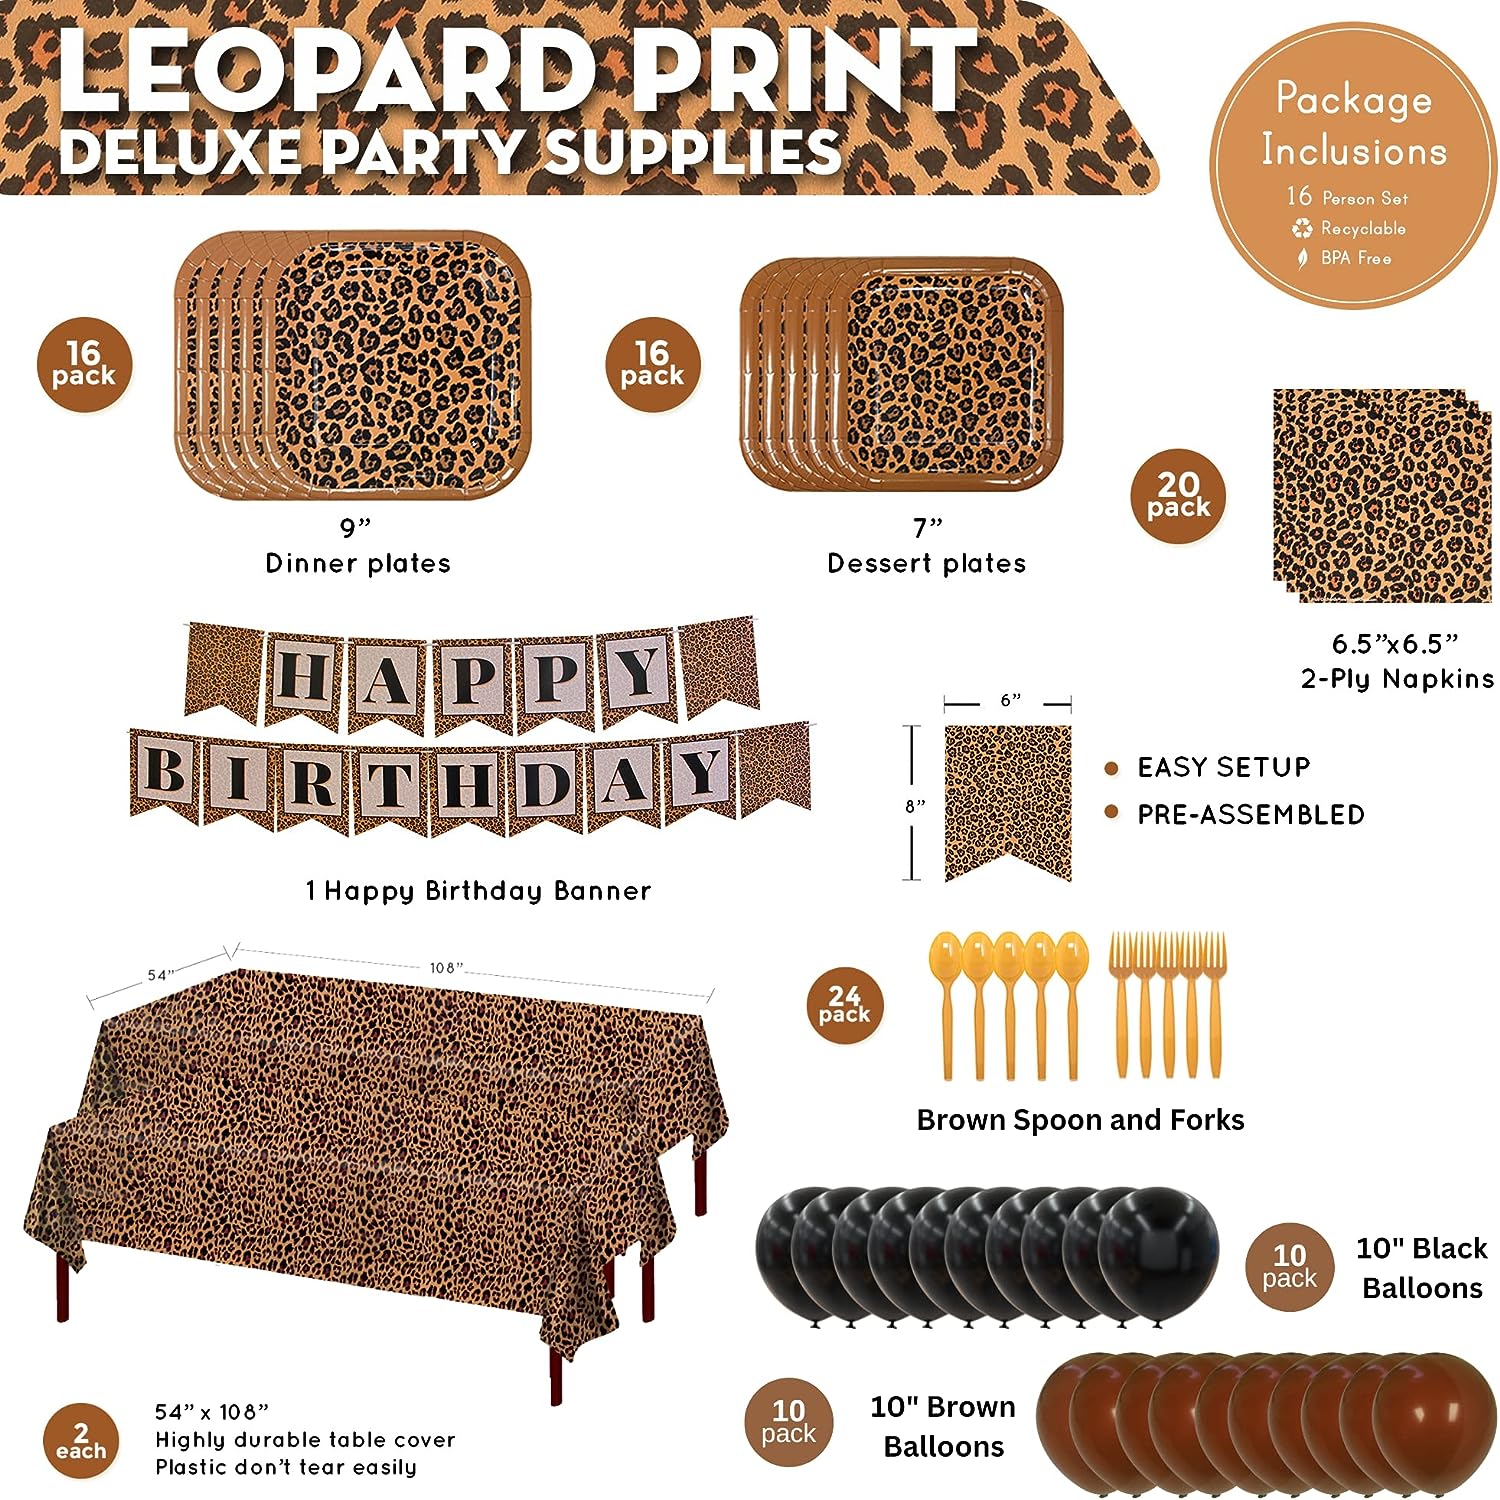 16 9-inch paper dinner plates, 16 7-inch paper dessert plates, 20 paper lunch napkins, 1 birthday banner, 2 plastic table covers 108” x 54”, 24 brown plastic forks, and 24 brown plastic spoons, 10 Brown Latex Balloons, 10 Black Latex Balloons.